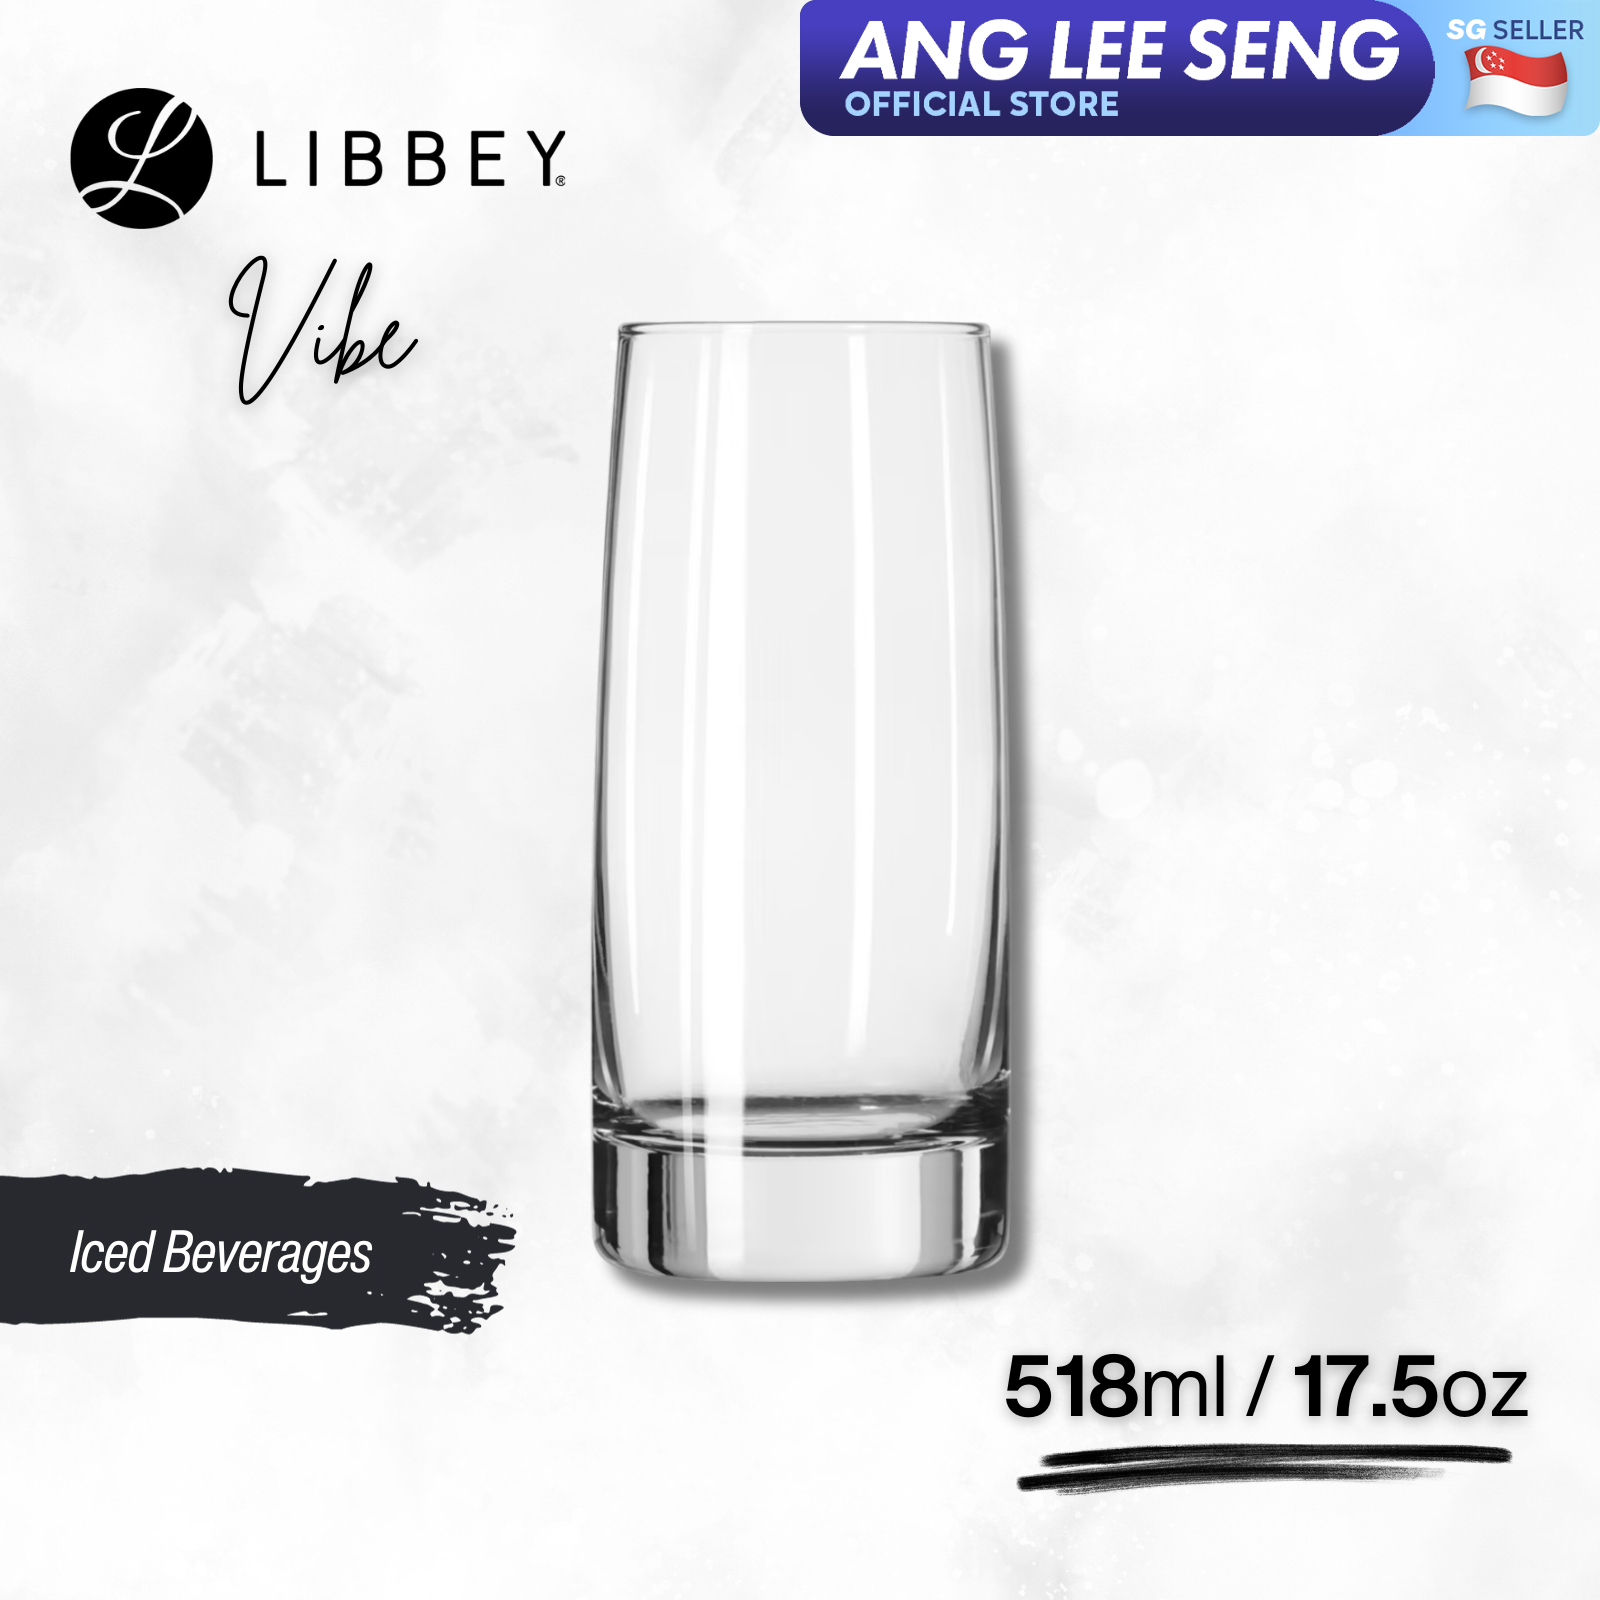 Libbey Vibe 2312 Cooler Tall Mixing/Drinking Glass 518ml/17.5oz - Extra Thick Base, 2-pc Set